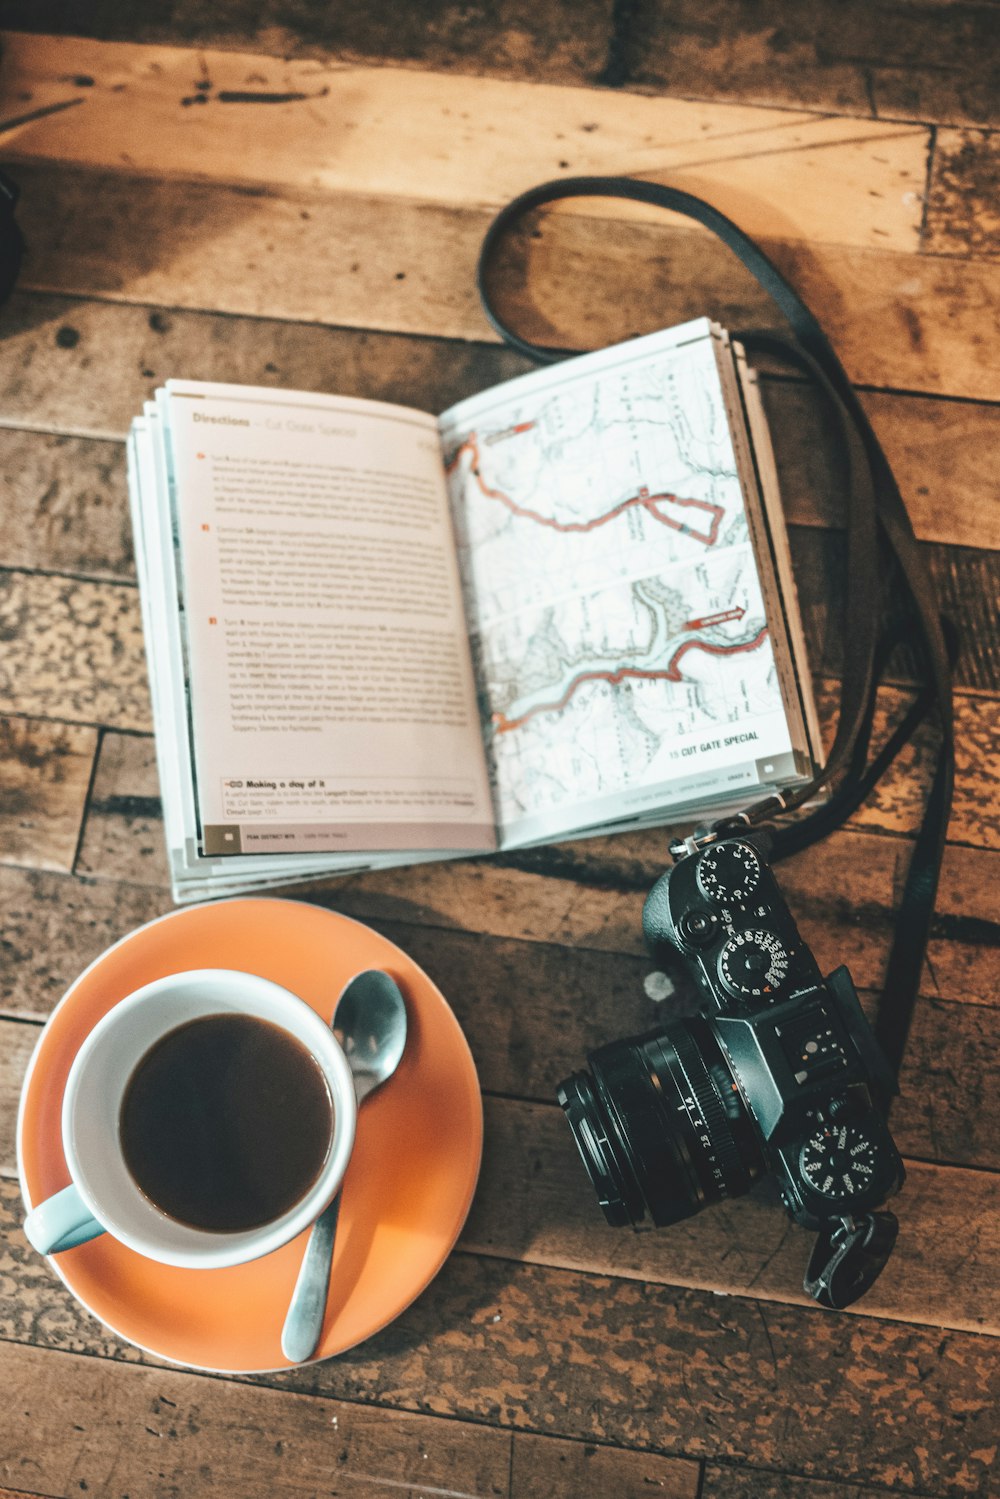 a camera, a book, and a cup of coffee on a table